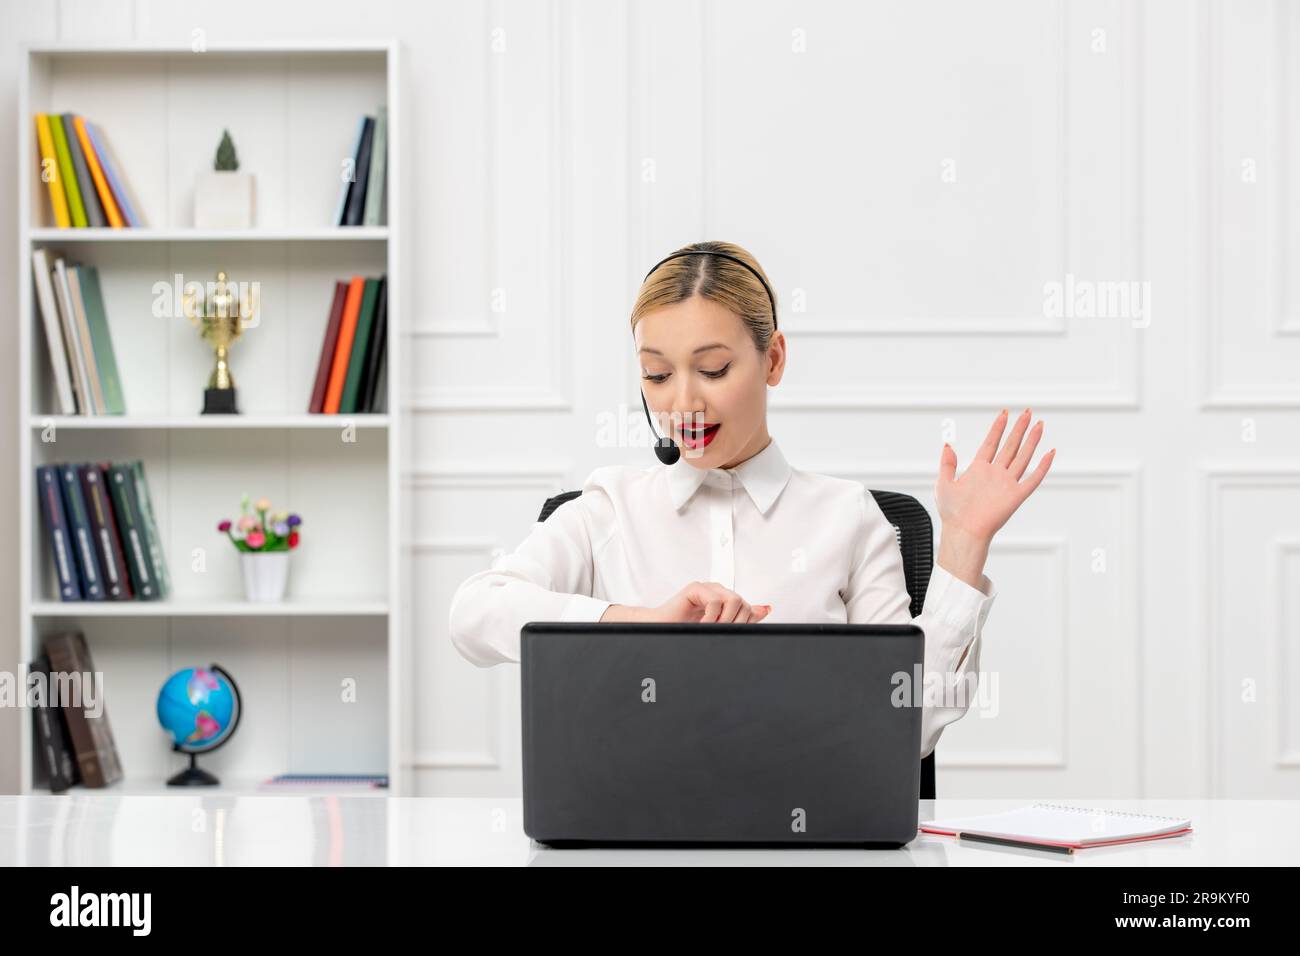 customer service cute blonde girl in office shirt with headset and computer looking at clocks Stock Photo